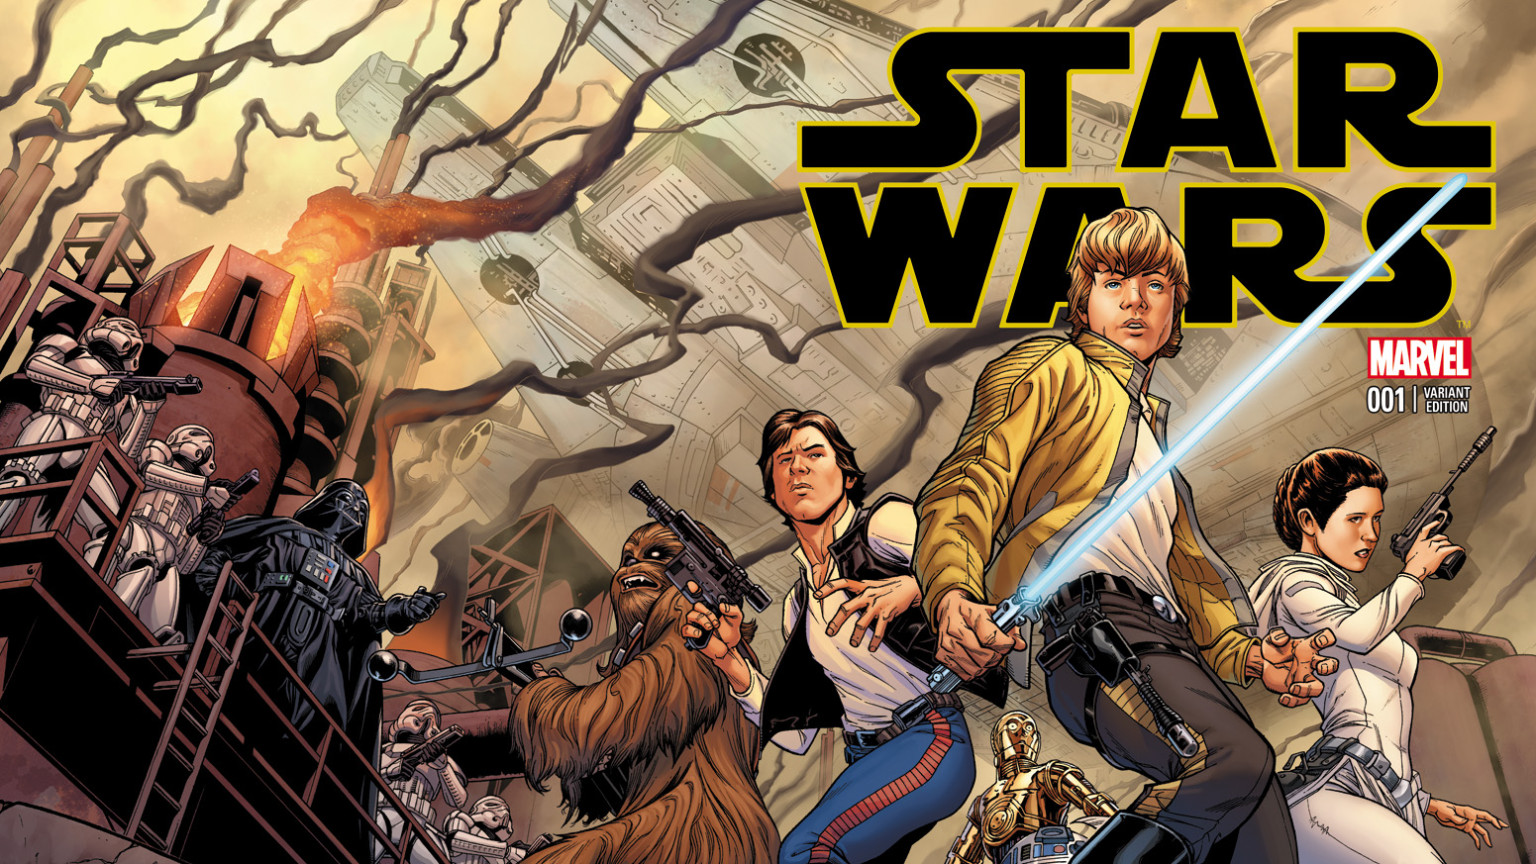 Star Wars The Force Awakens: These Are The Comics You’re Looking For